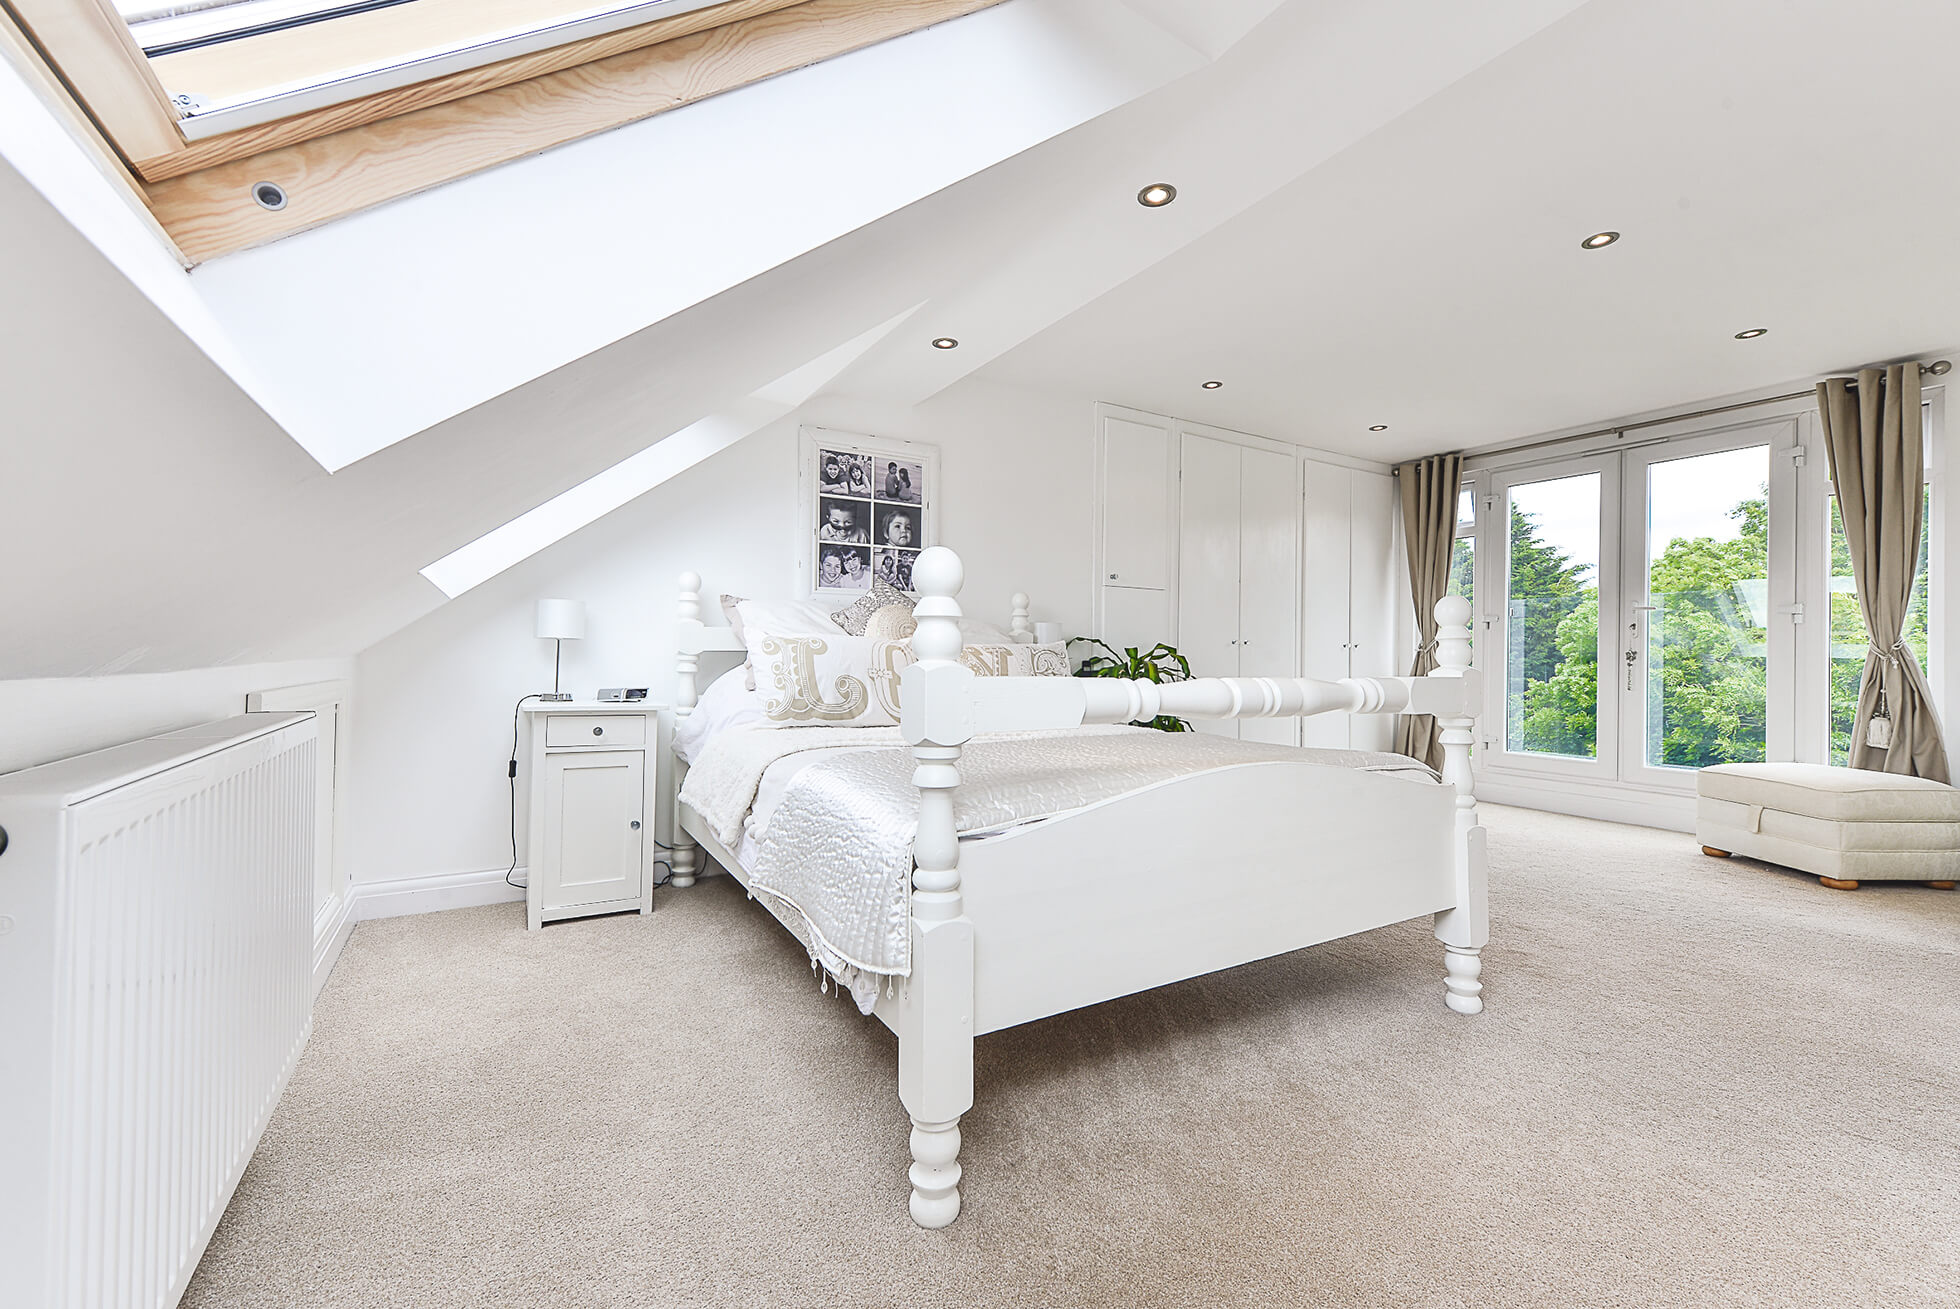 Do you have a question about converting your Loft in Kensworth? Here are the most popular questions asked by our clients.